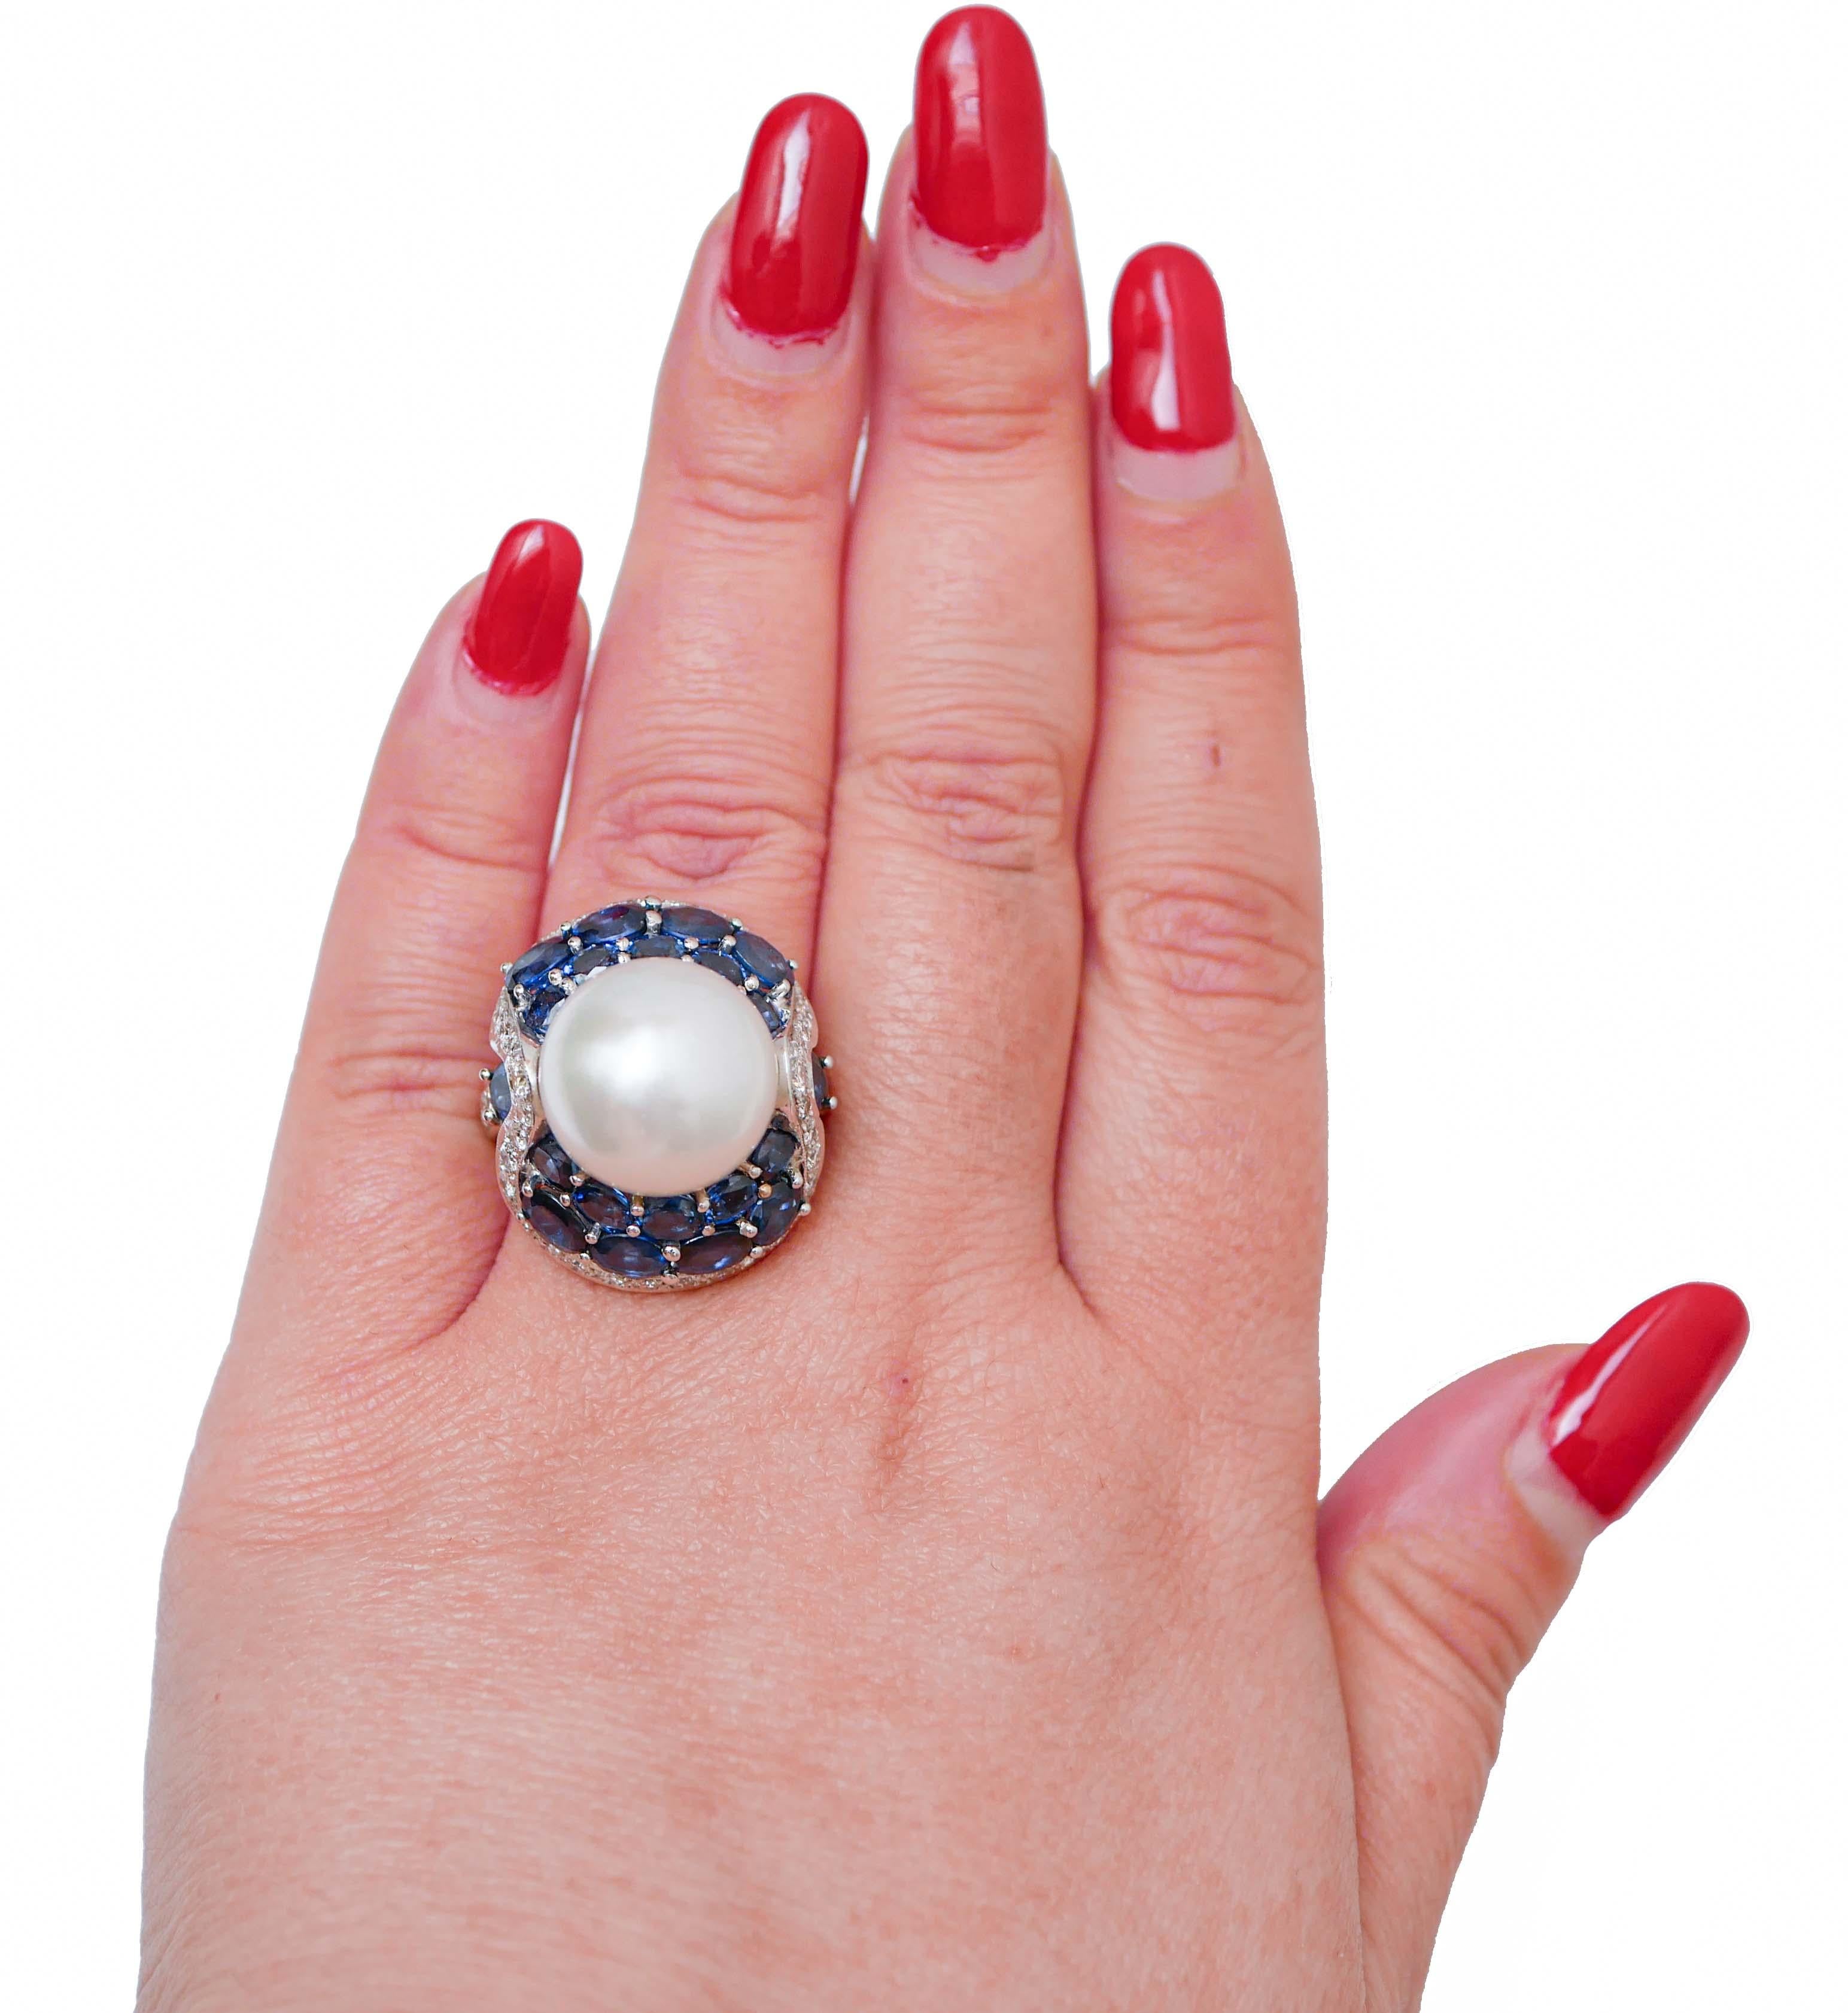 Mixed Cut South-Sea Pearl, Sapphires, Diamonds, 14 Karat White Gold Ring. For Sale